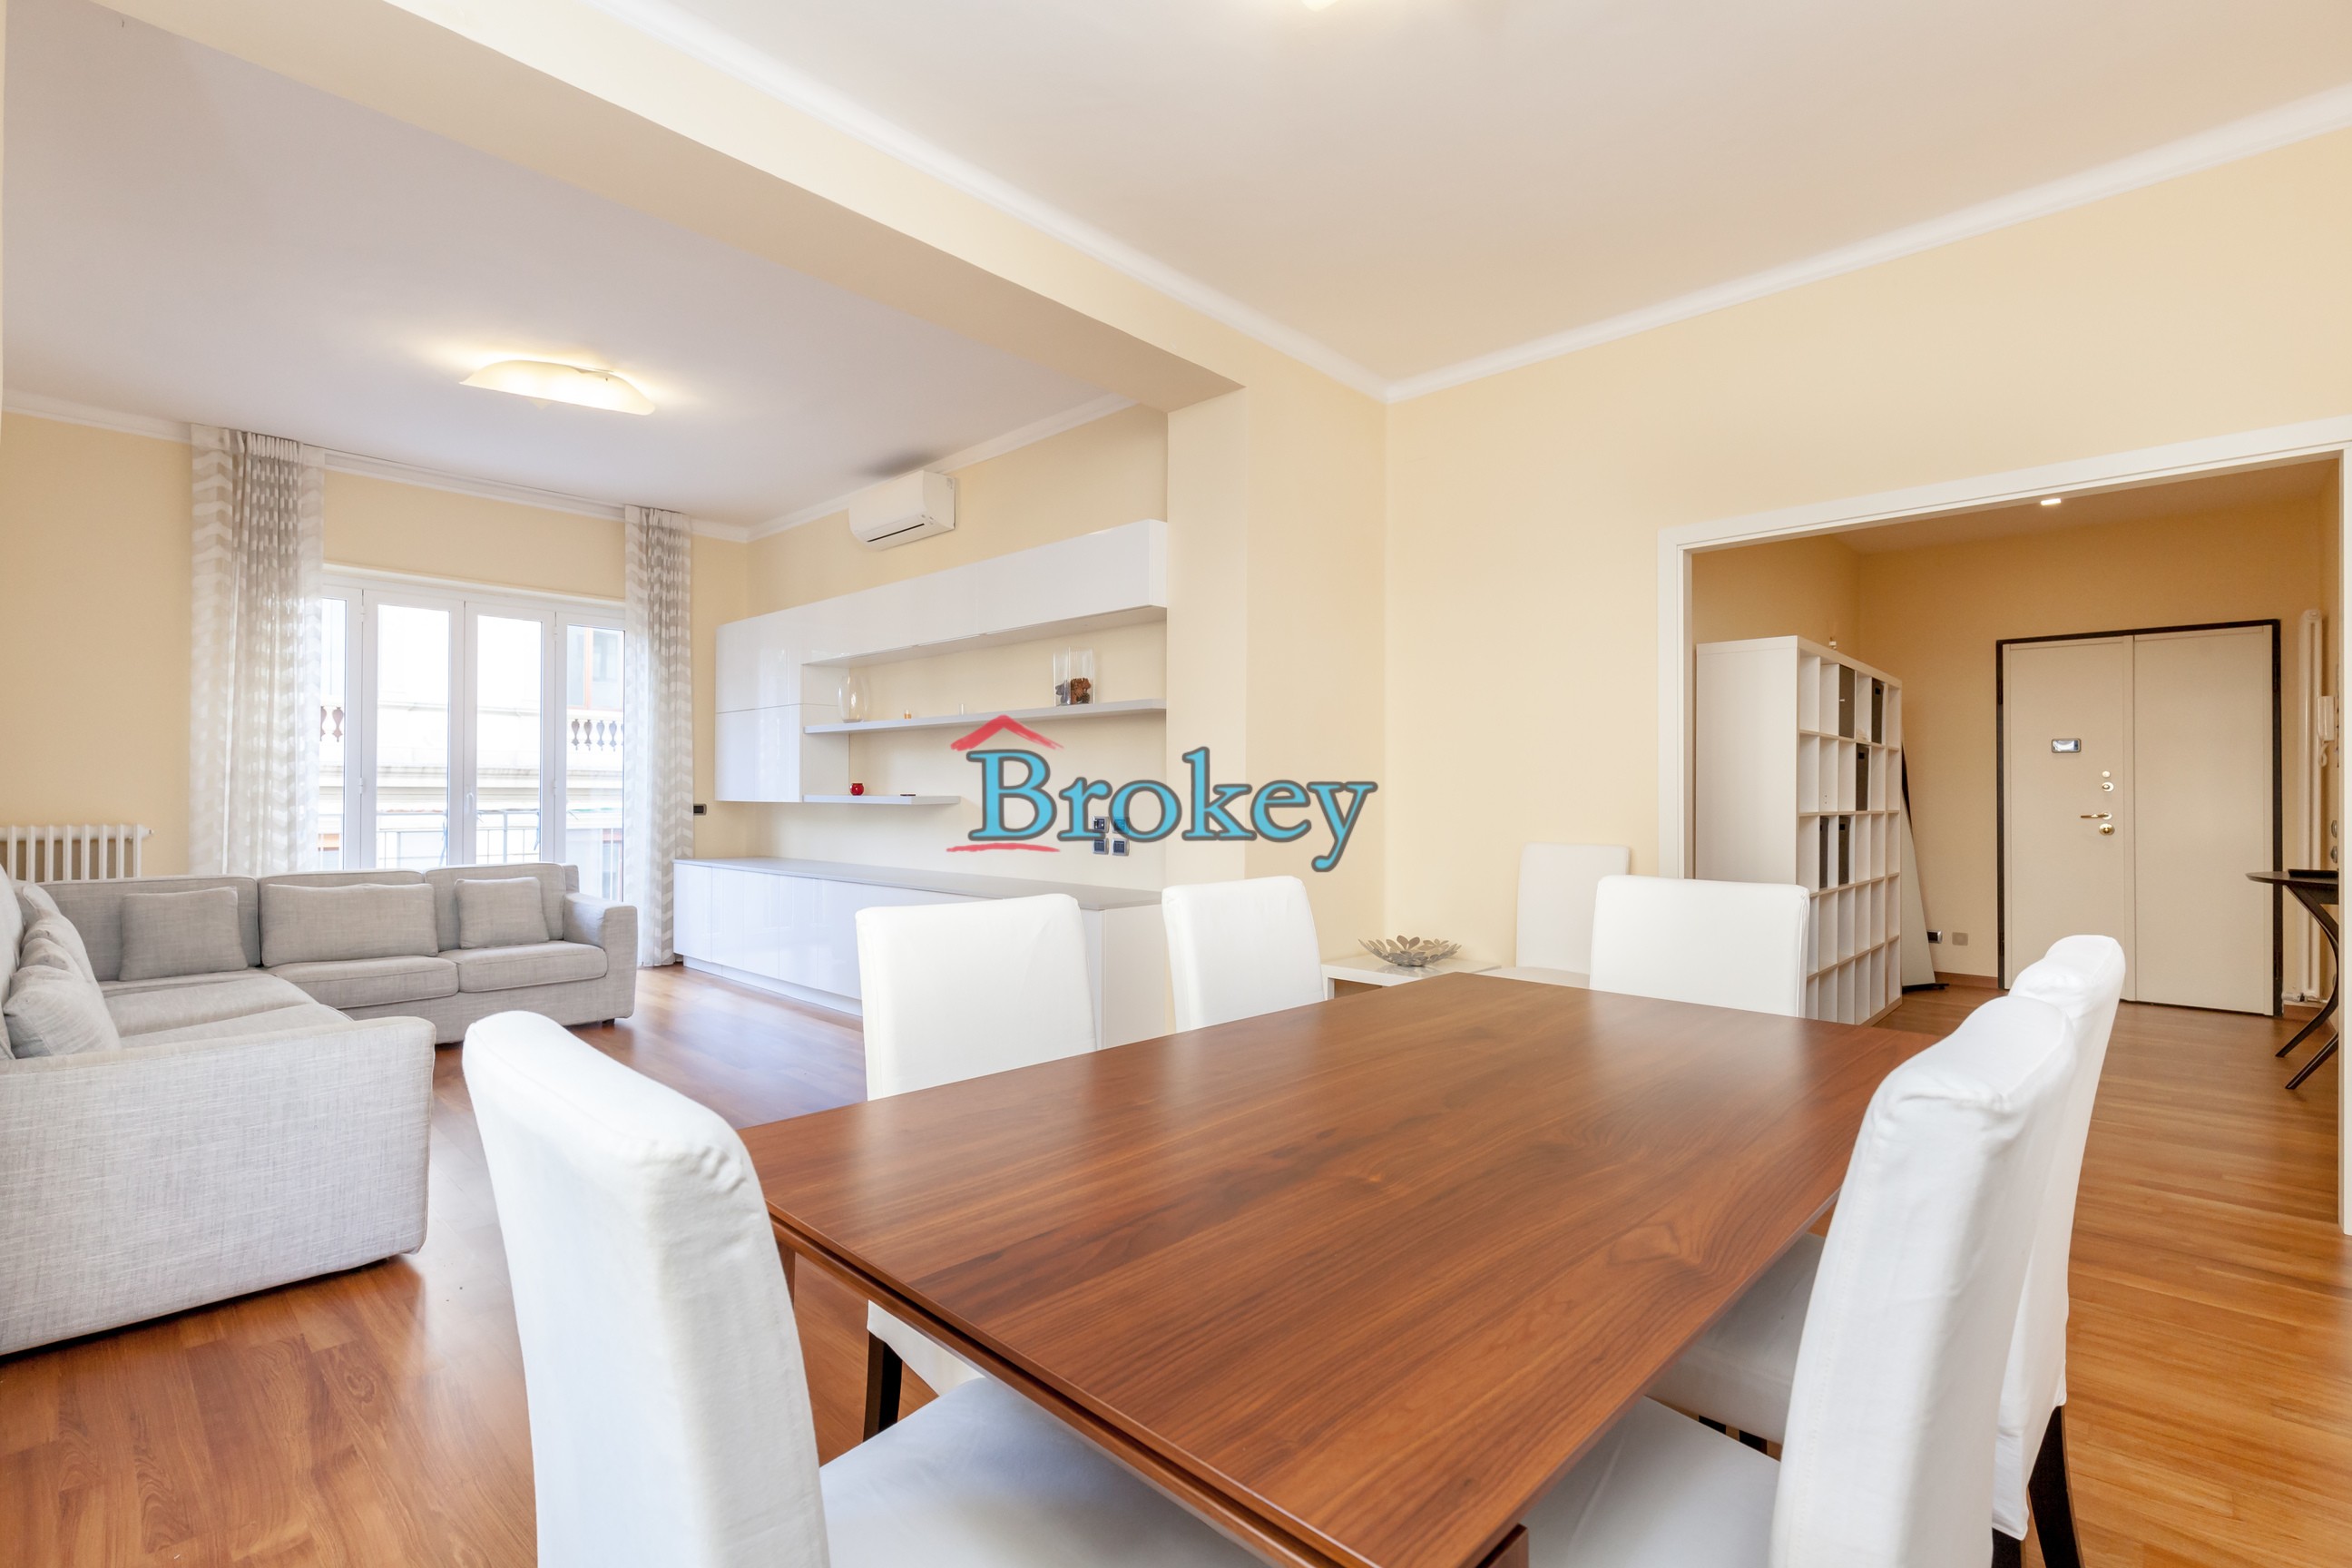 Recently renovated apartment in the center of Ancona, ready to live in